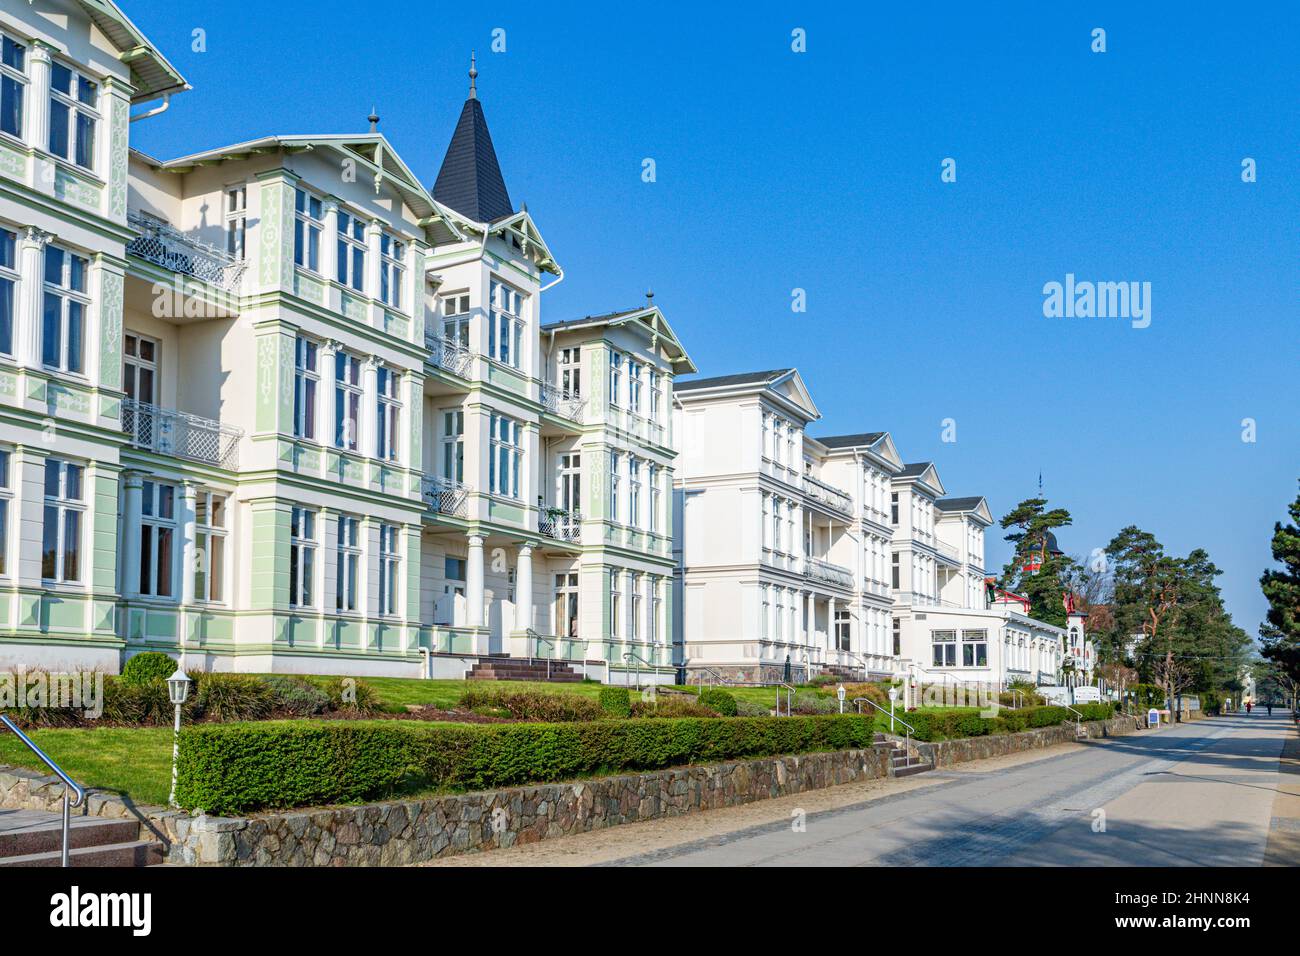 Zinnowitz Germany High Resolution Stock Photography and Images - Alamy